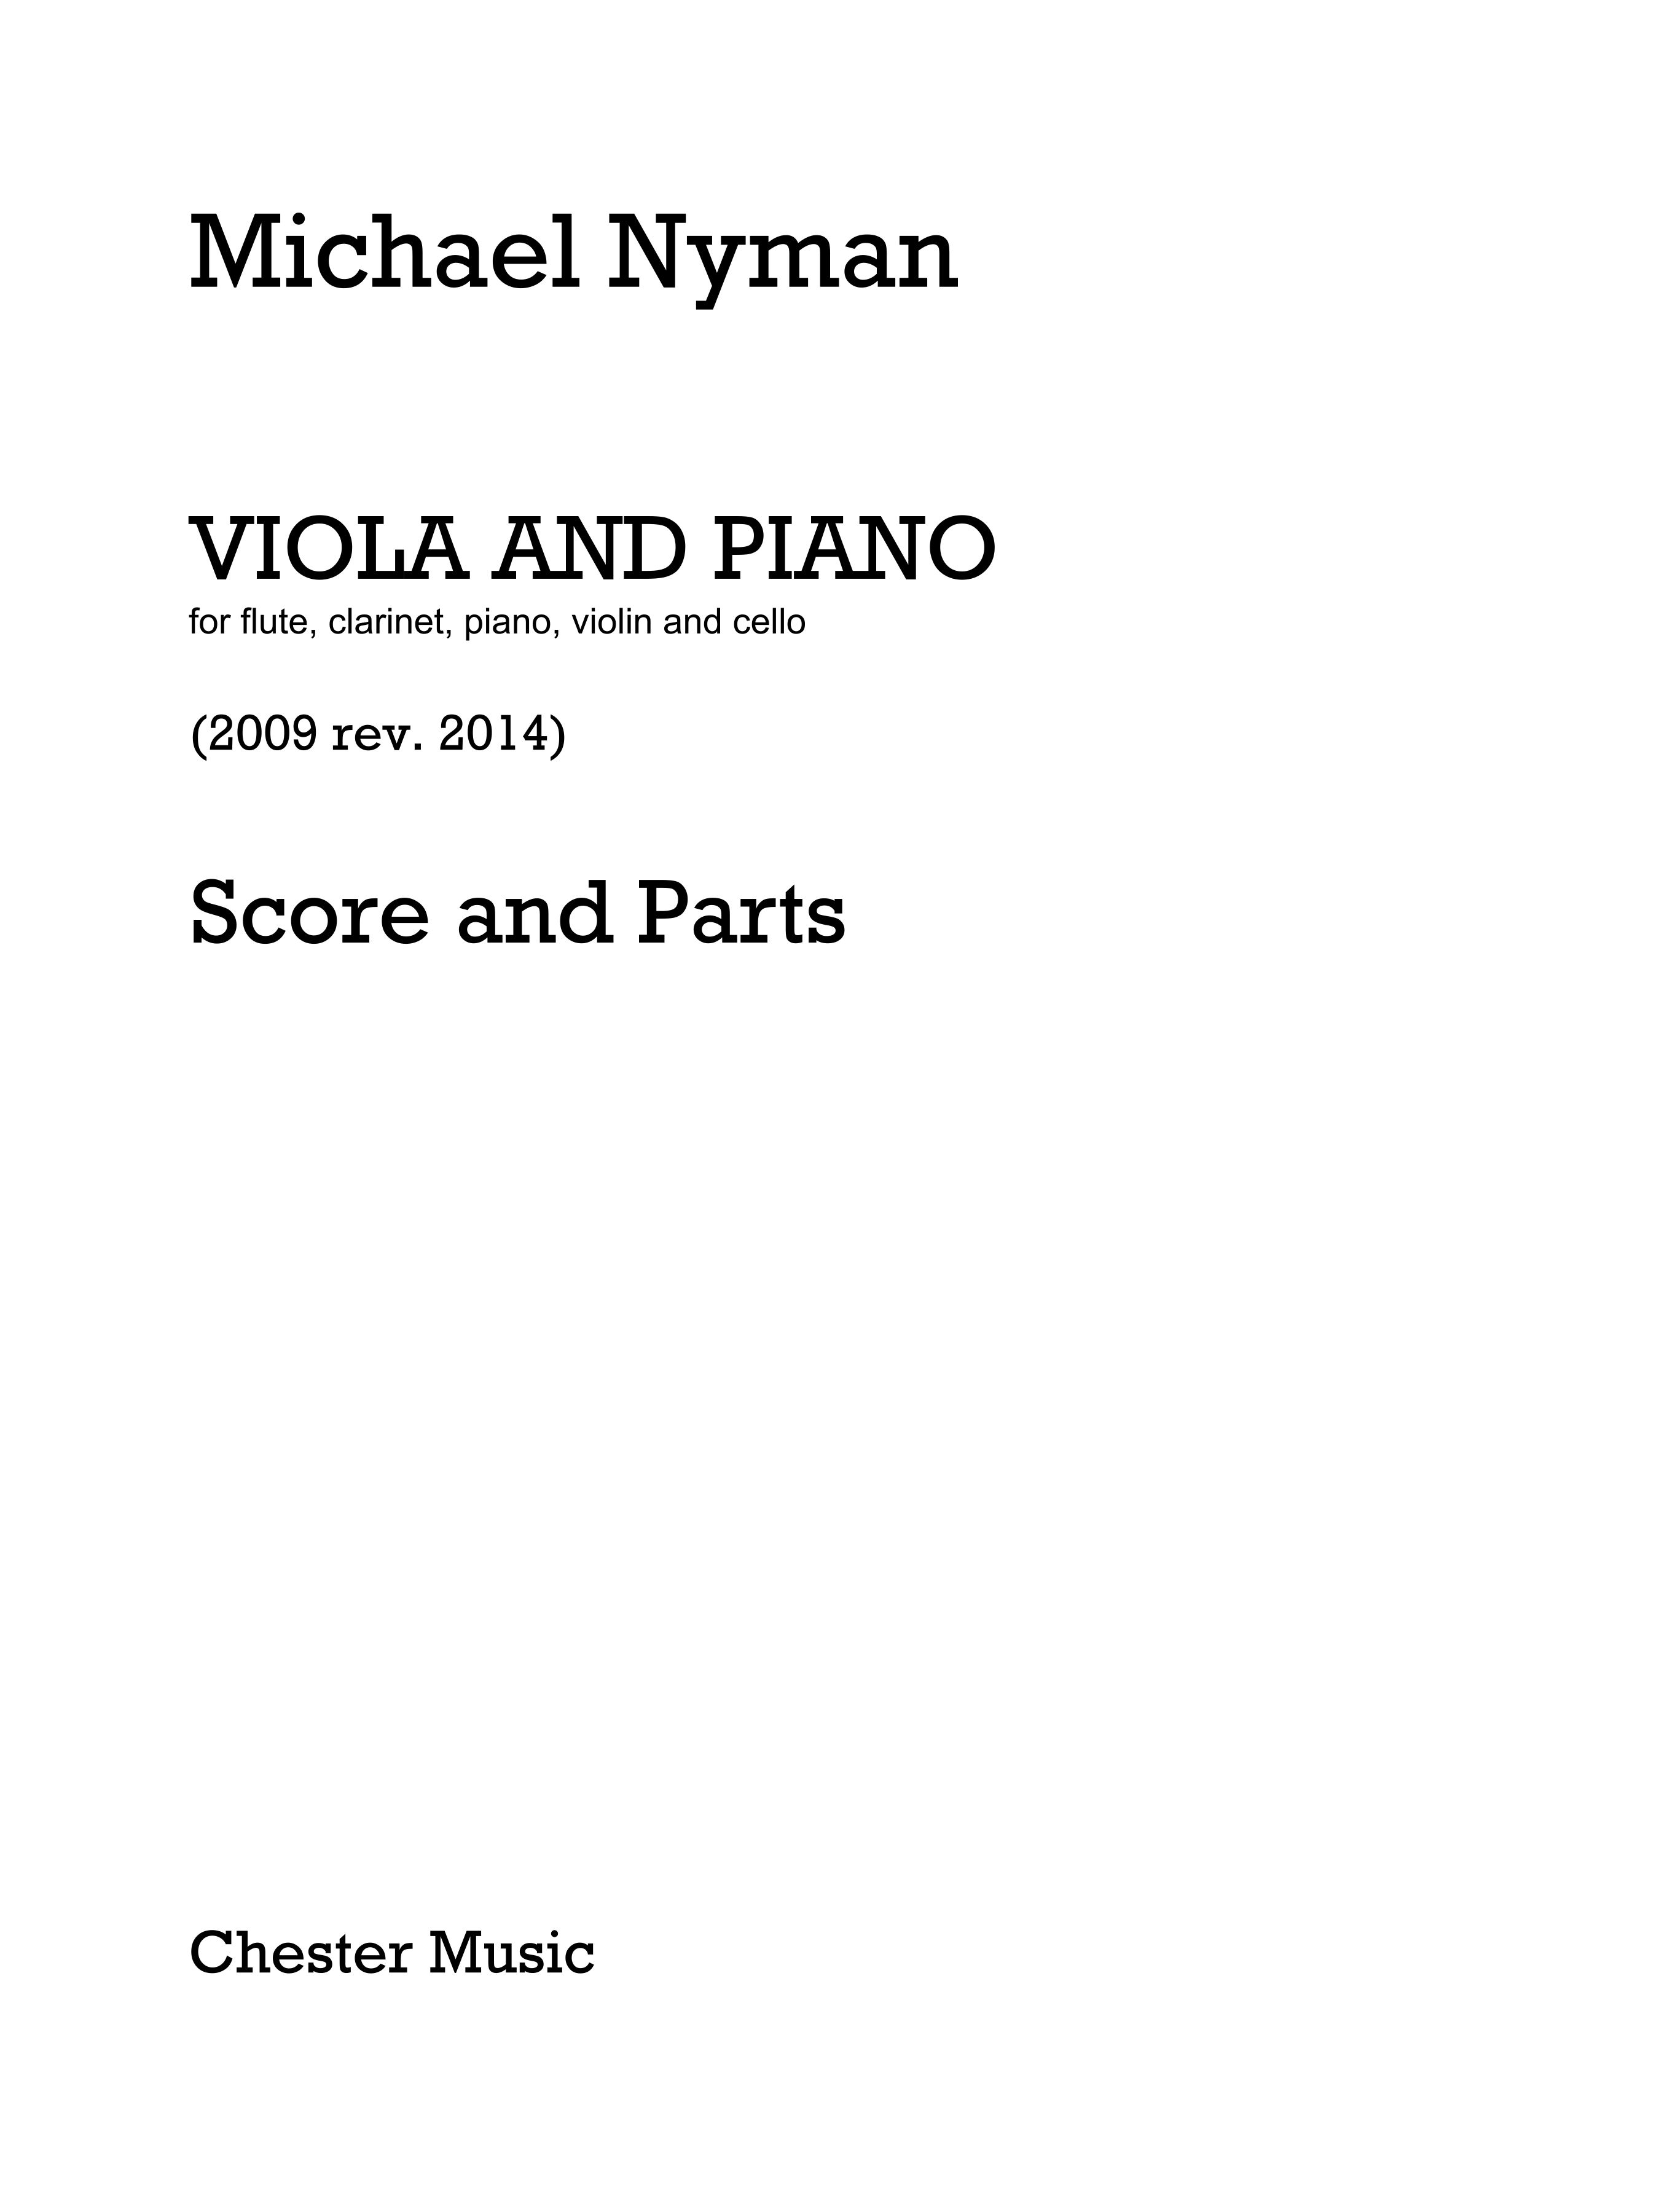 Michael Nyman: Viola and Piano (Revised 2014): Chamber Ensemble: Score and Parts